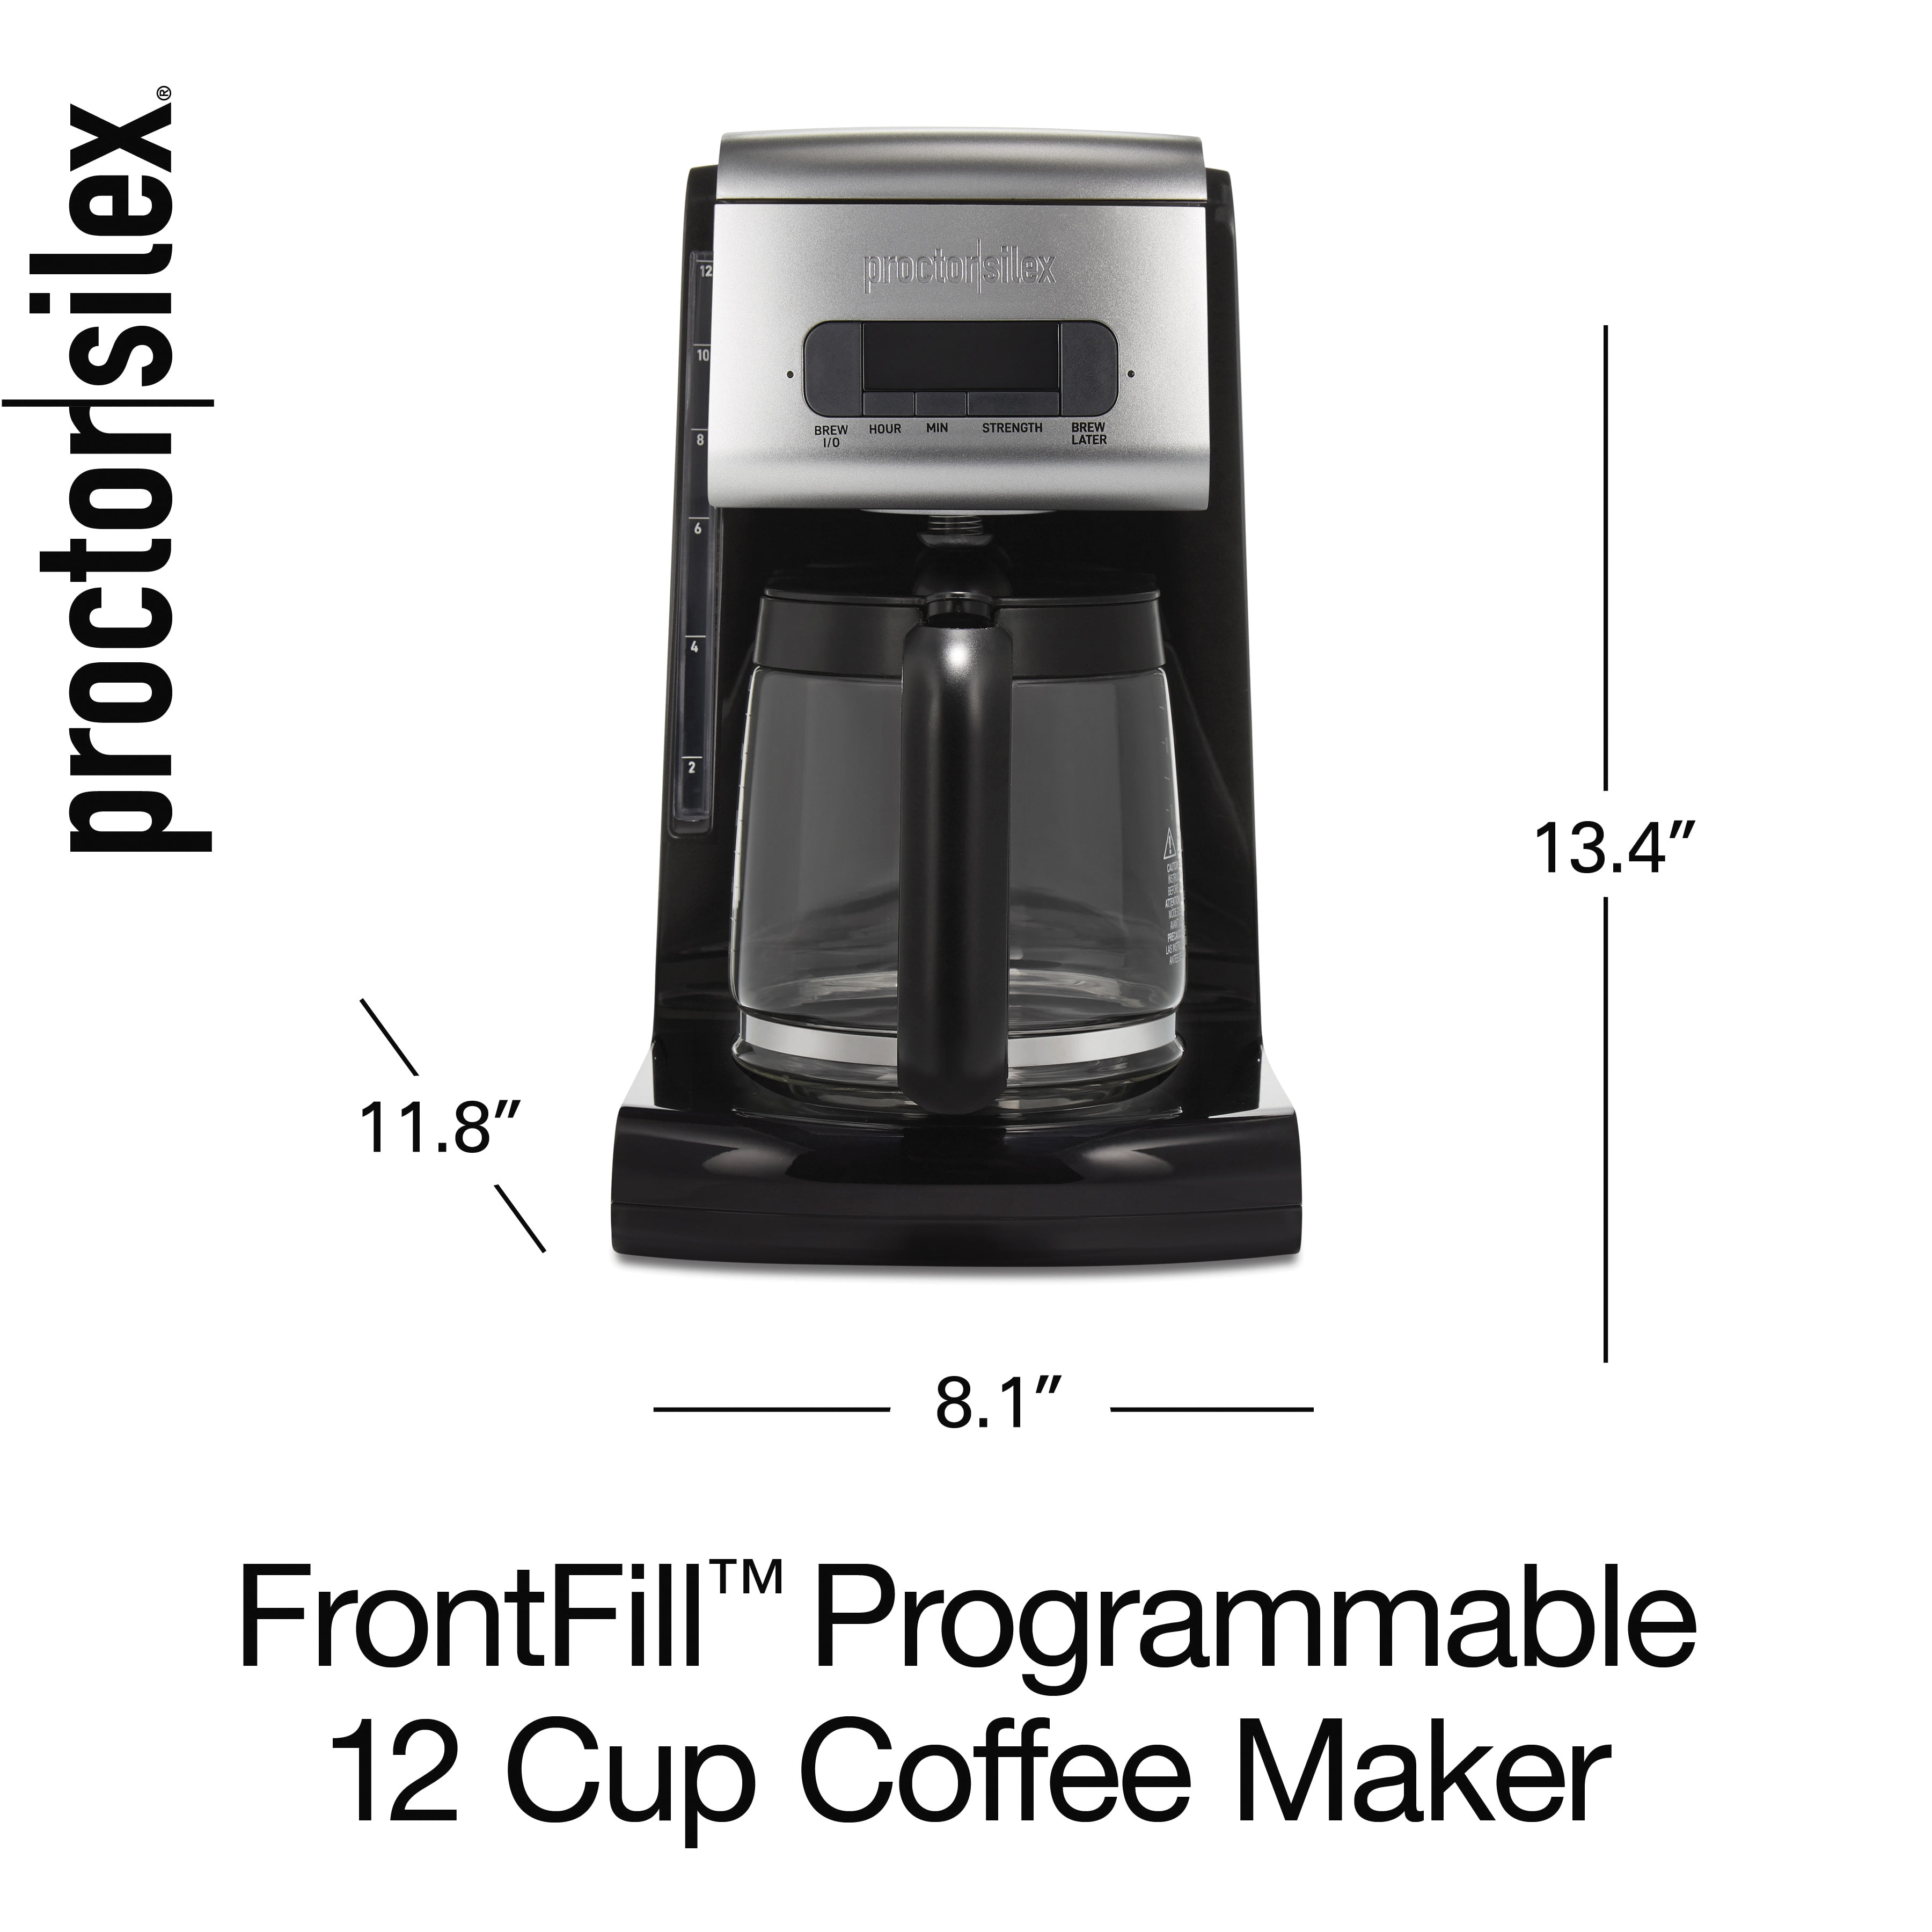 Proctor Silex White Coffee Maker 12-cup 43501 – Good's Store Online